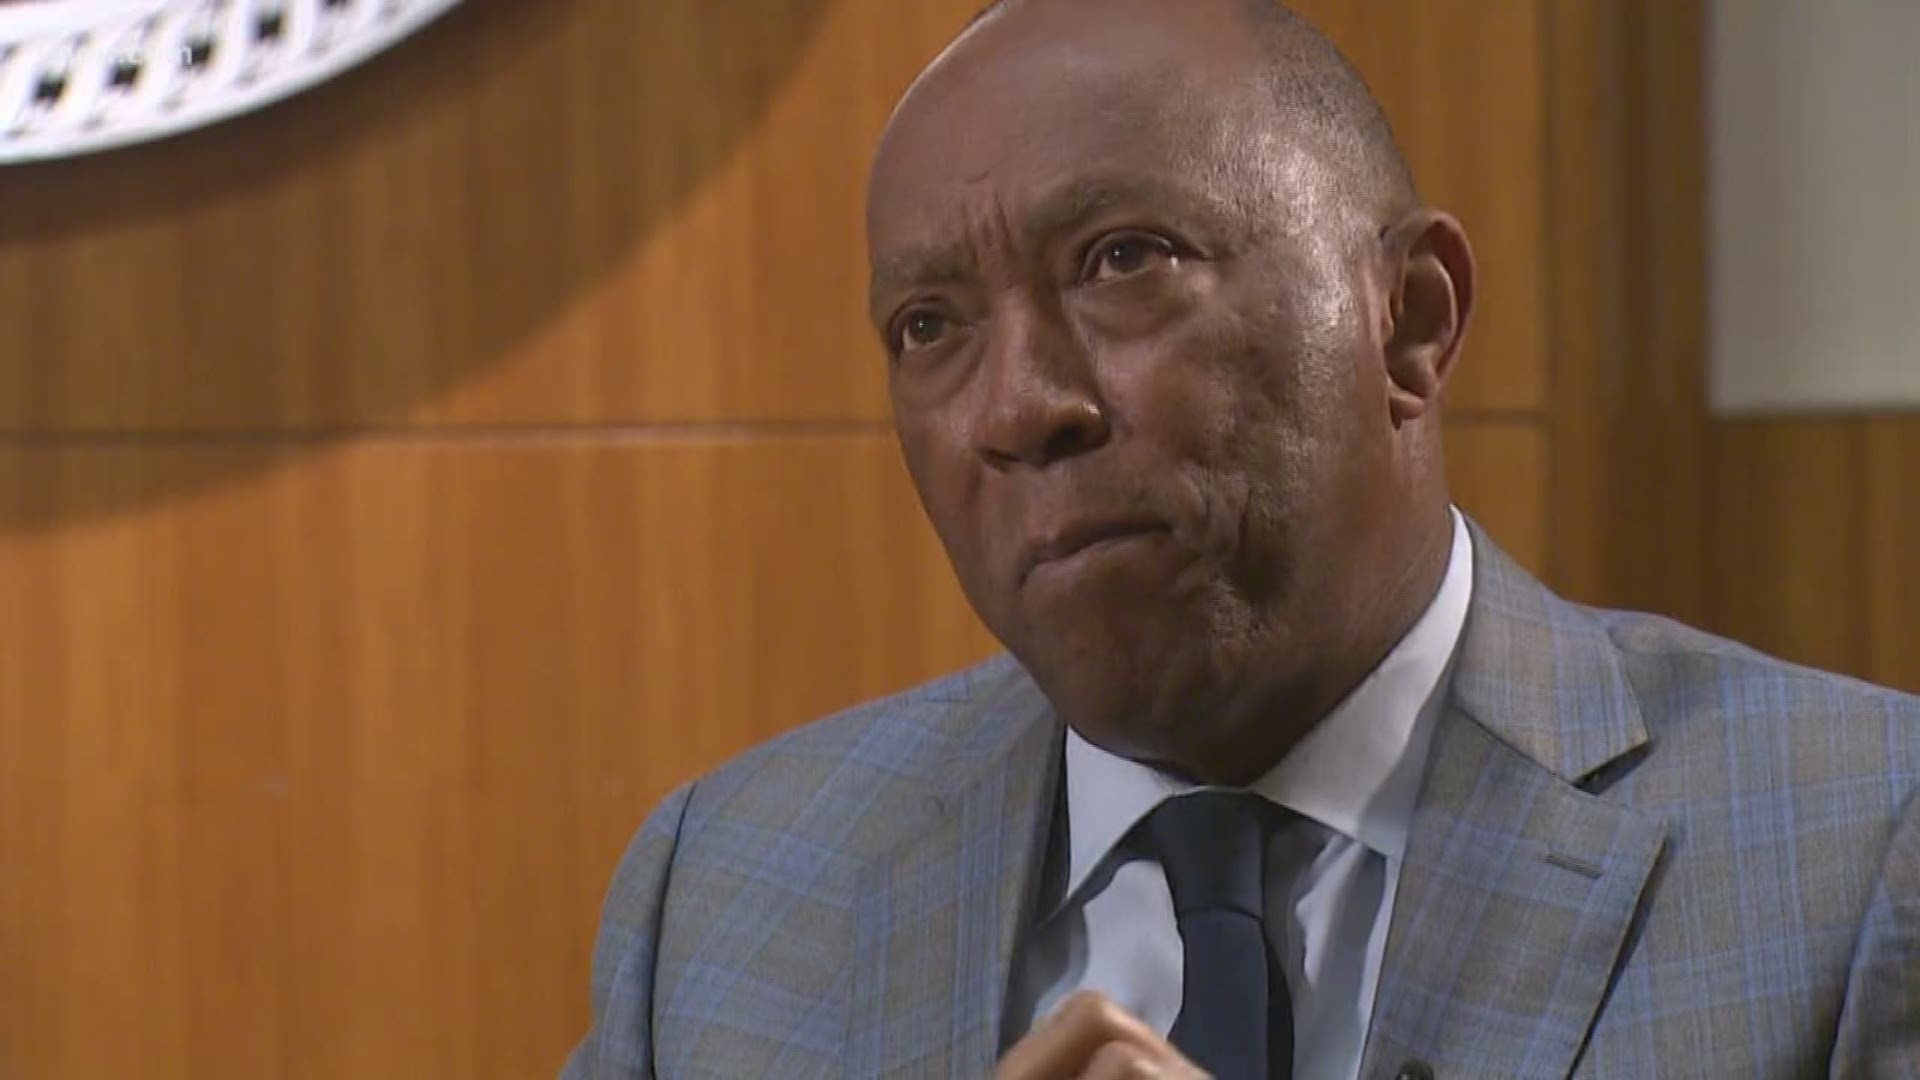 Houston mayor Sylvester Turner sat down with KHOU 11's Len Cannon to talk about the challenges he faces in his second term.